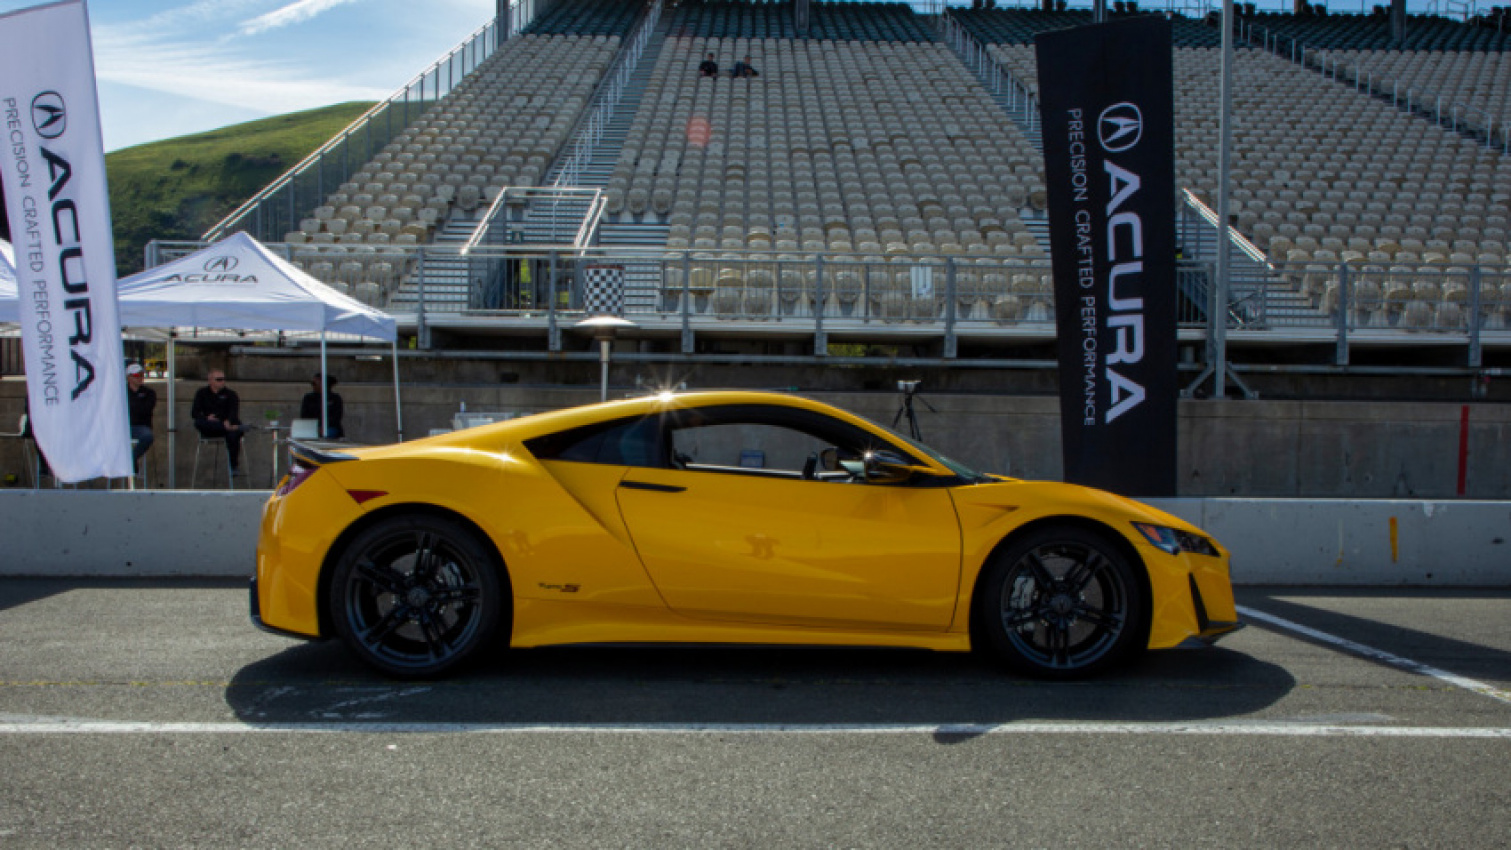 acura, autos, cars, acura news, acura nsx, acura nsx news, first drives, hybrids, monterey car week, performance, supercars, first drive review: 2022 acura nsx type s makes parting sweet sorrow